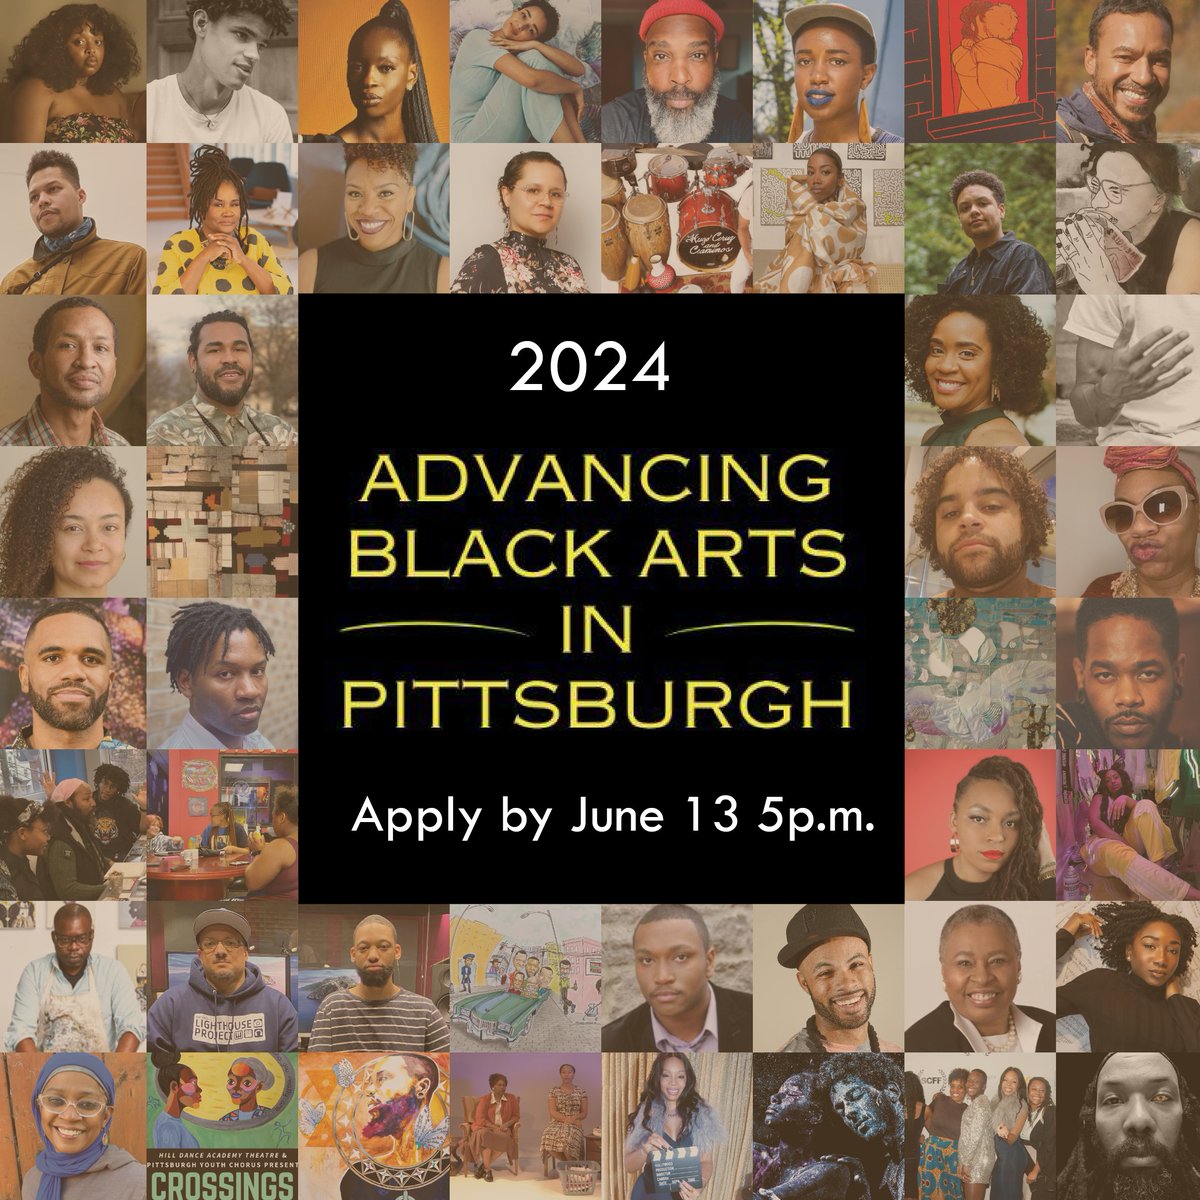 Advancing Black Arts in Pittsburgh applications are now being accepted for the ’24 grantmaking program. Apply by 5pm June 13; sign up for virtual community Q&A session on Tues. May 13 @ 5 pm. More info: heinz.org/strategic-area… @PittsburghFdn